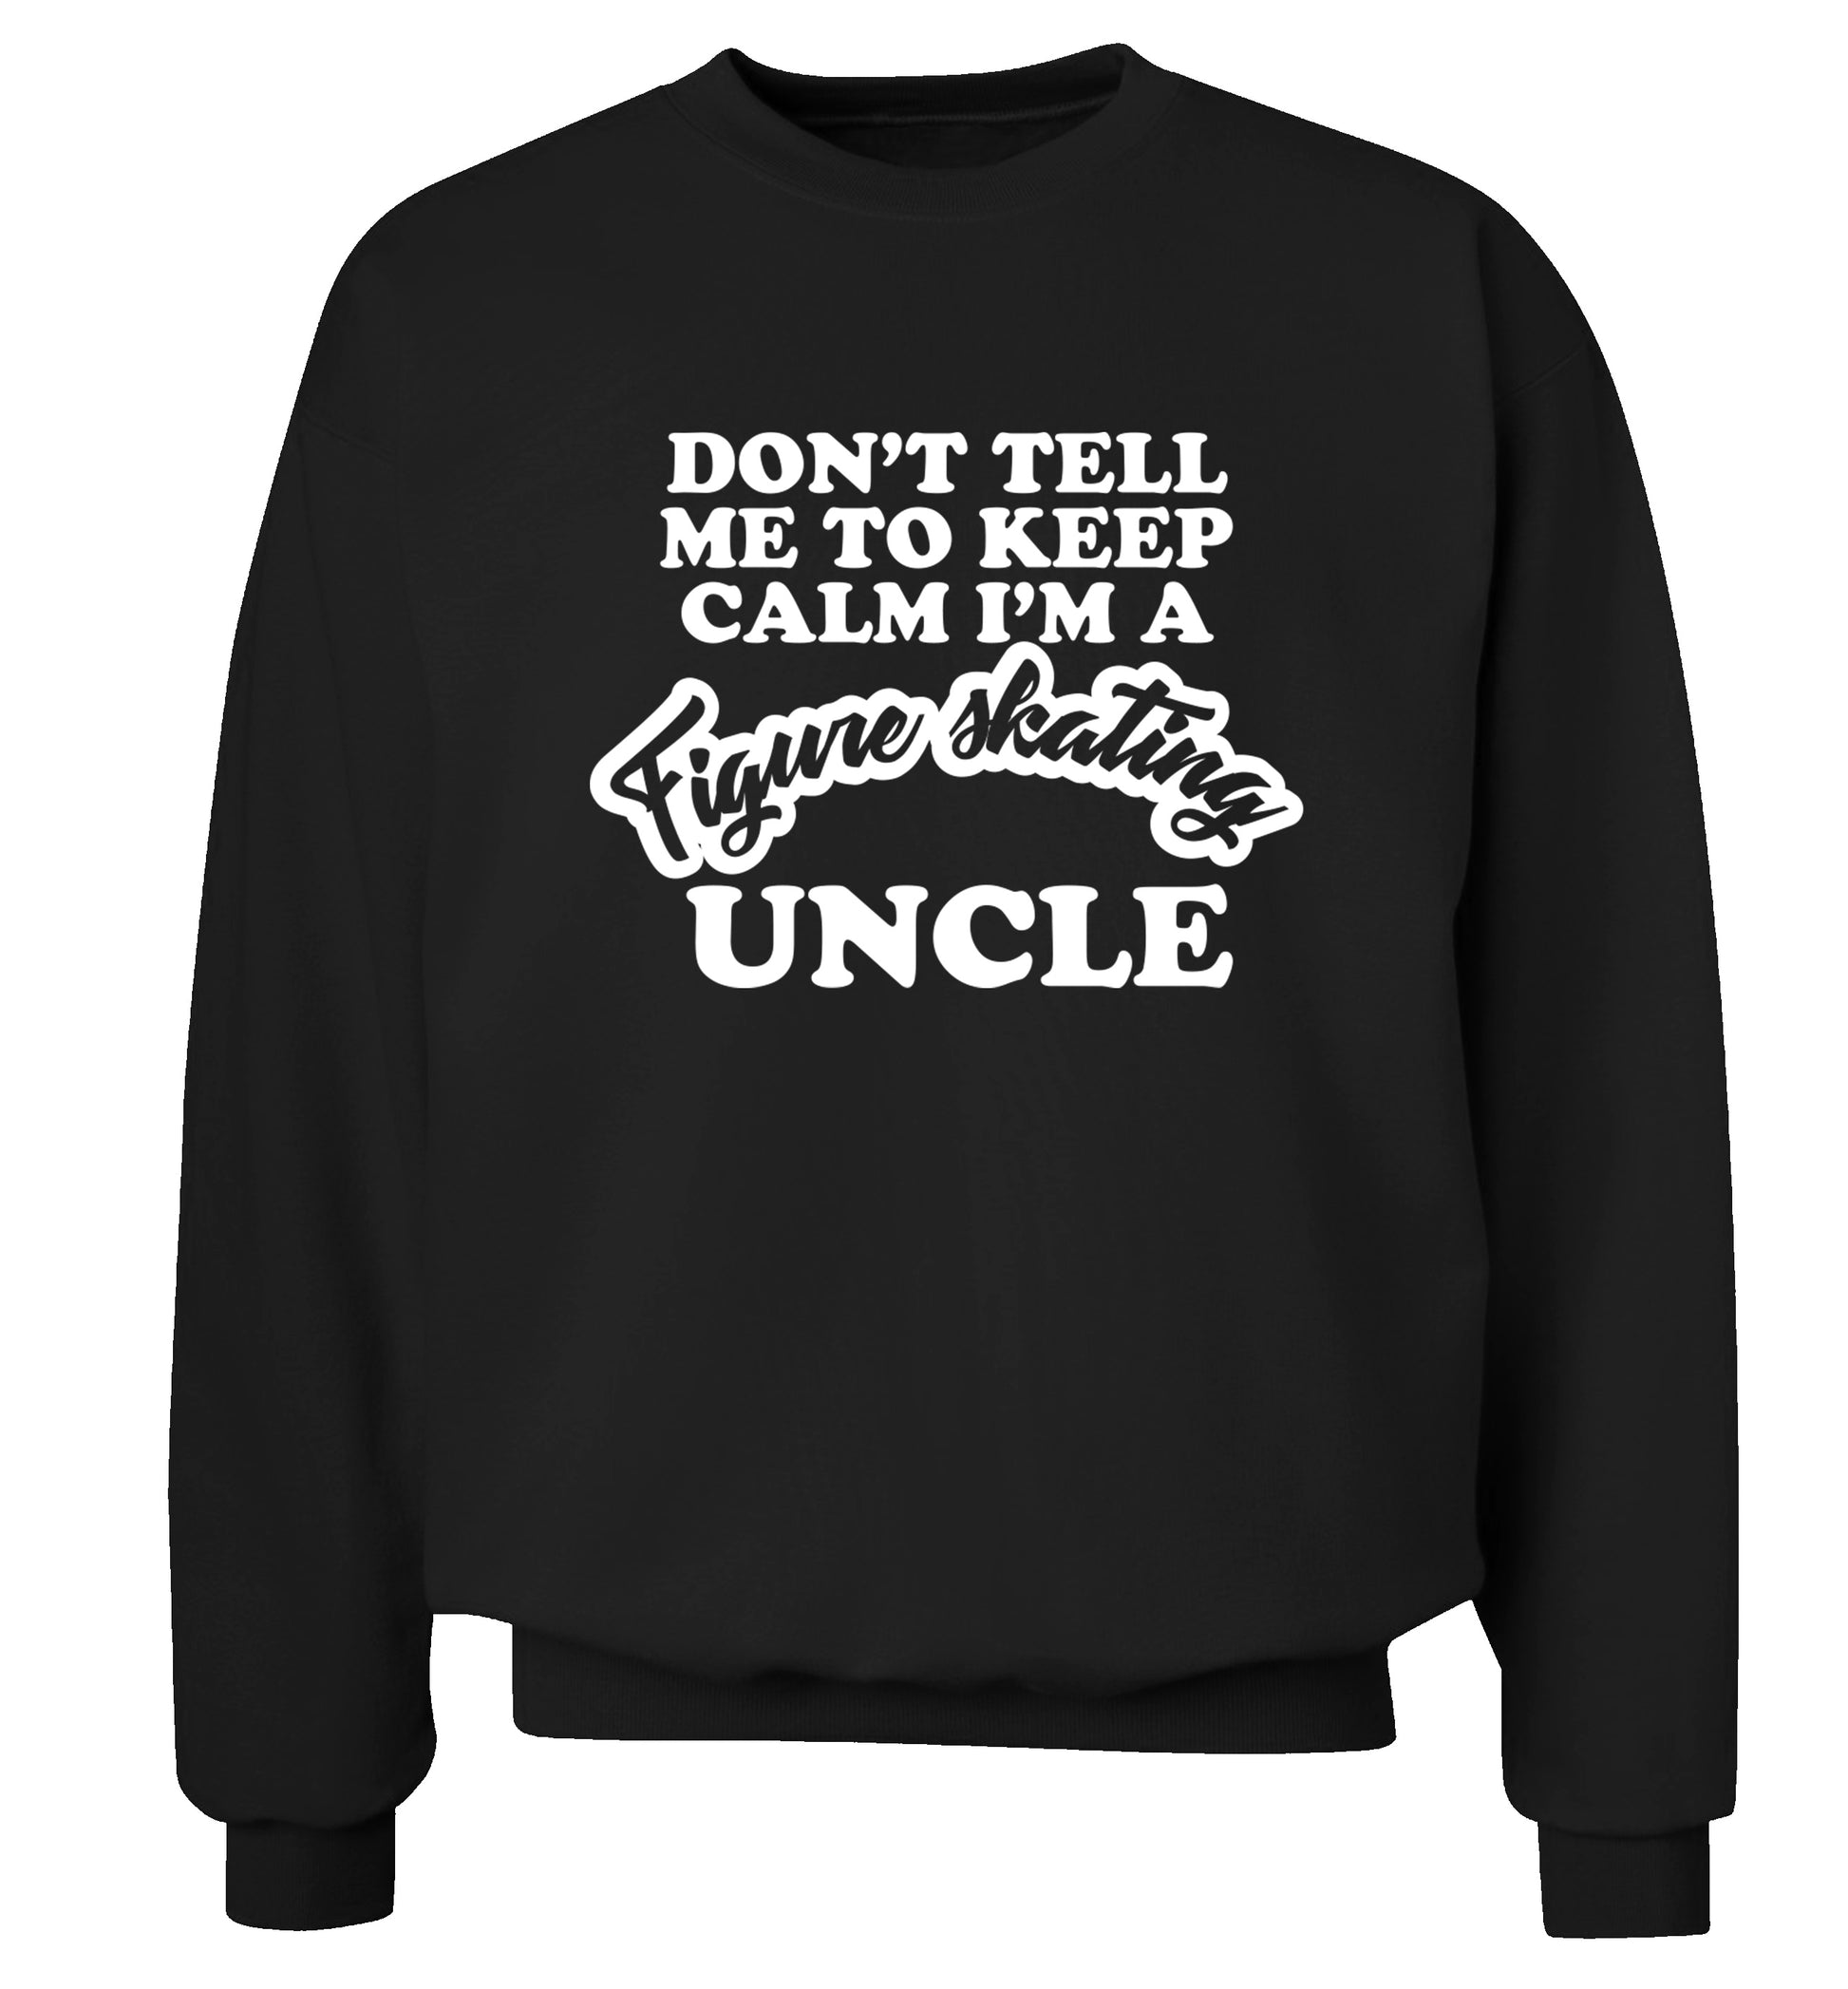 Don't tell me to keep calm I'm a figure skating uncle Adult's unisexblack Sweater 2XL